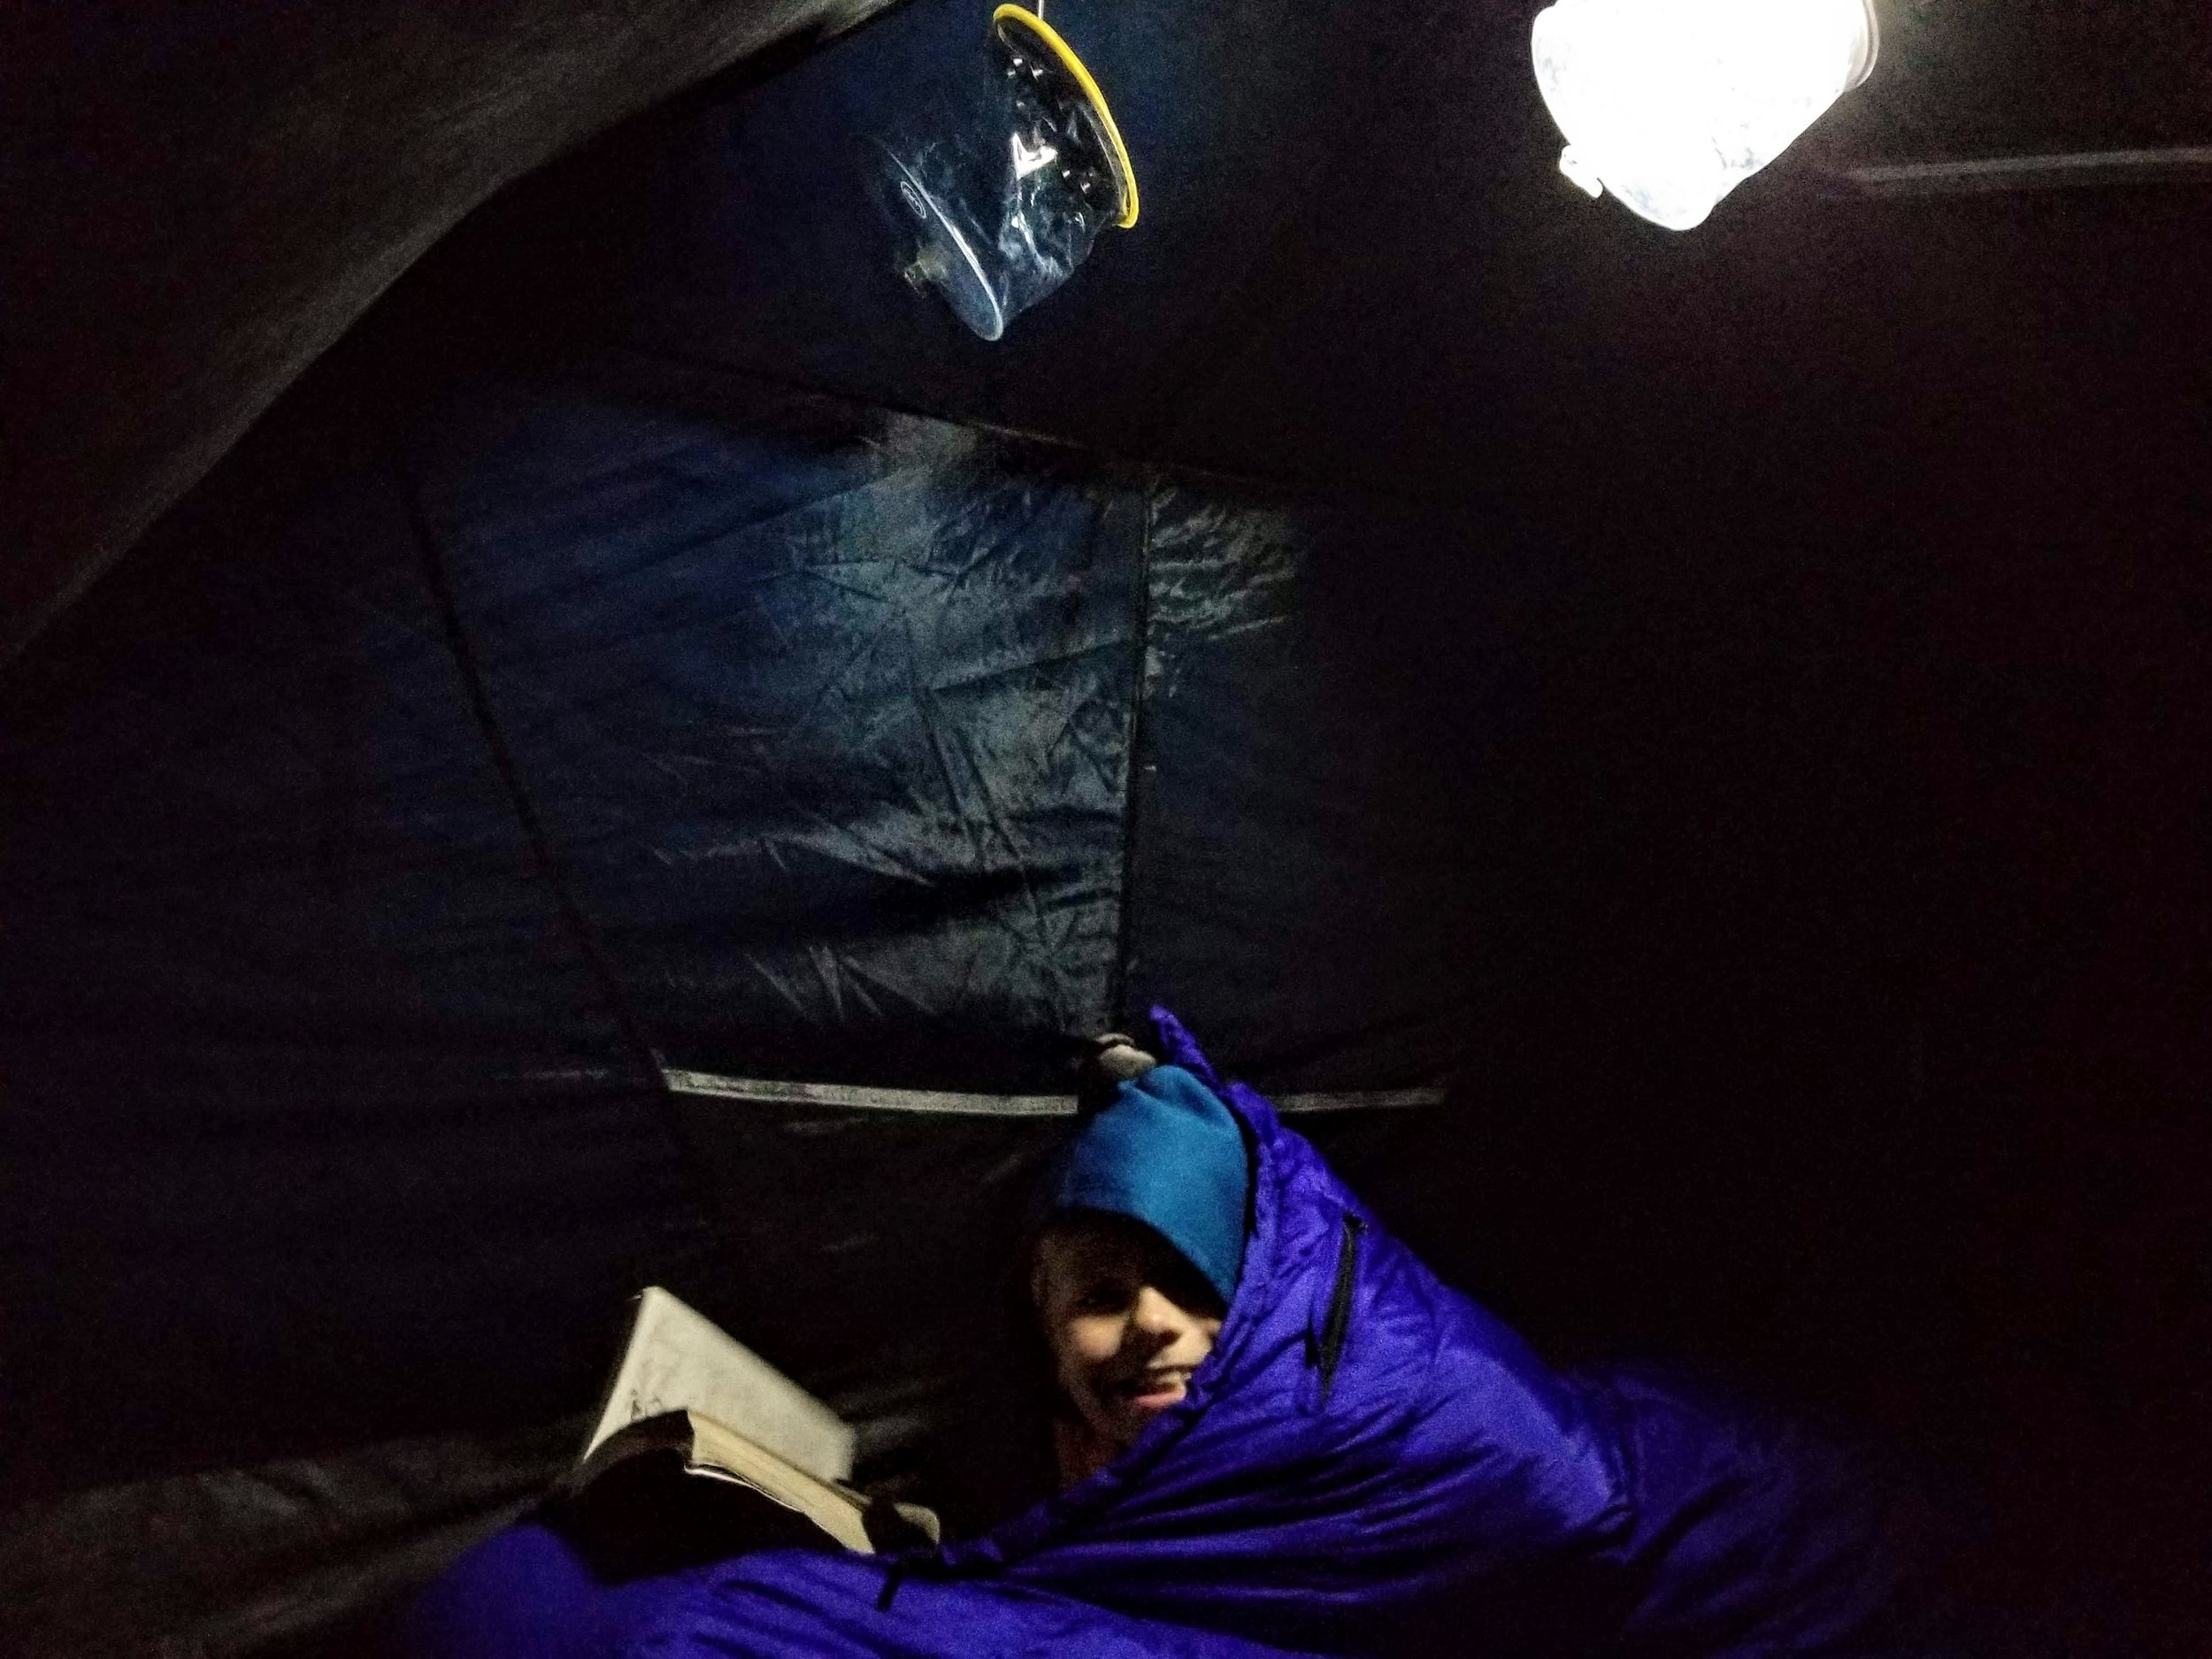 Reading by the light of a Luci light in the tent. 